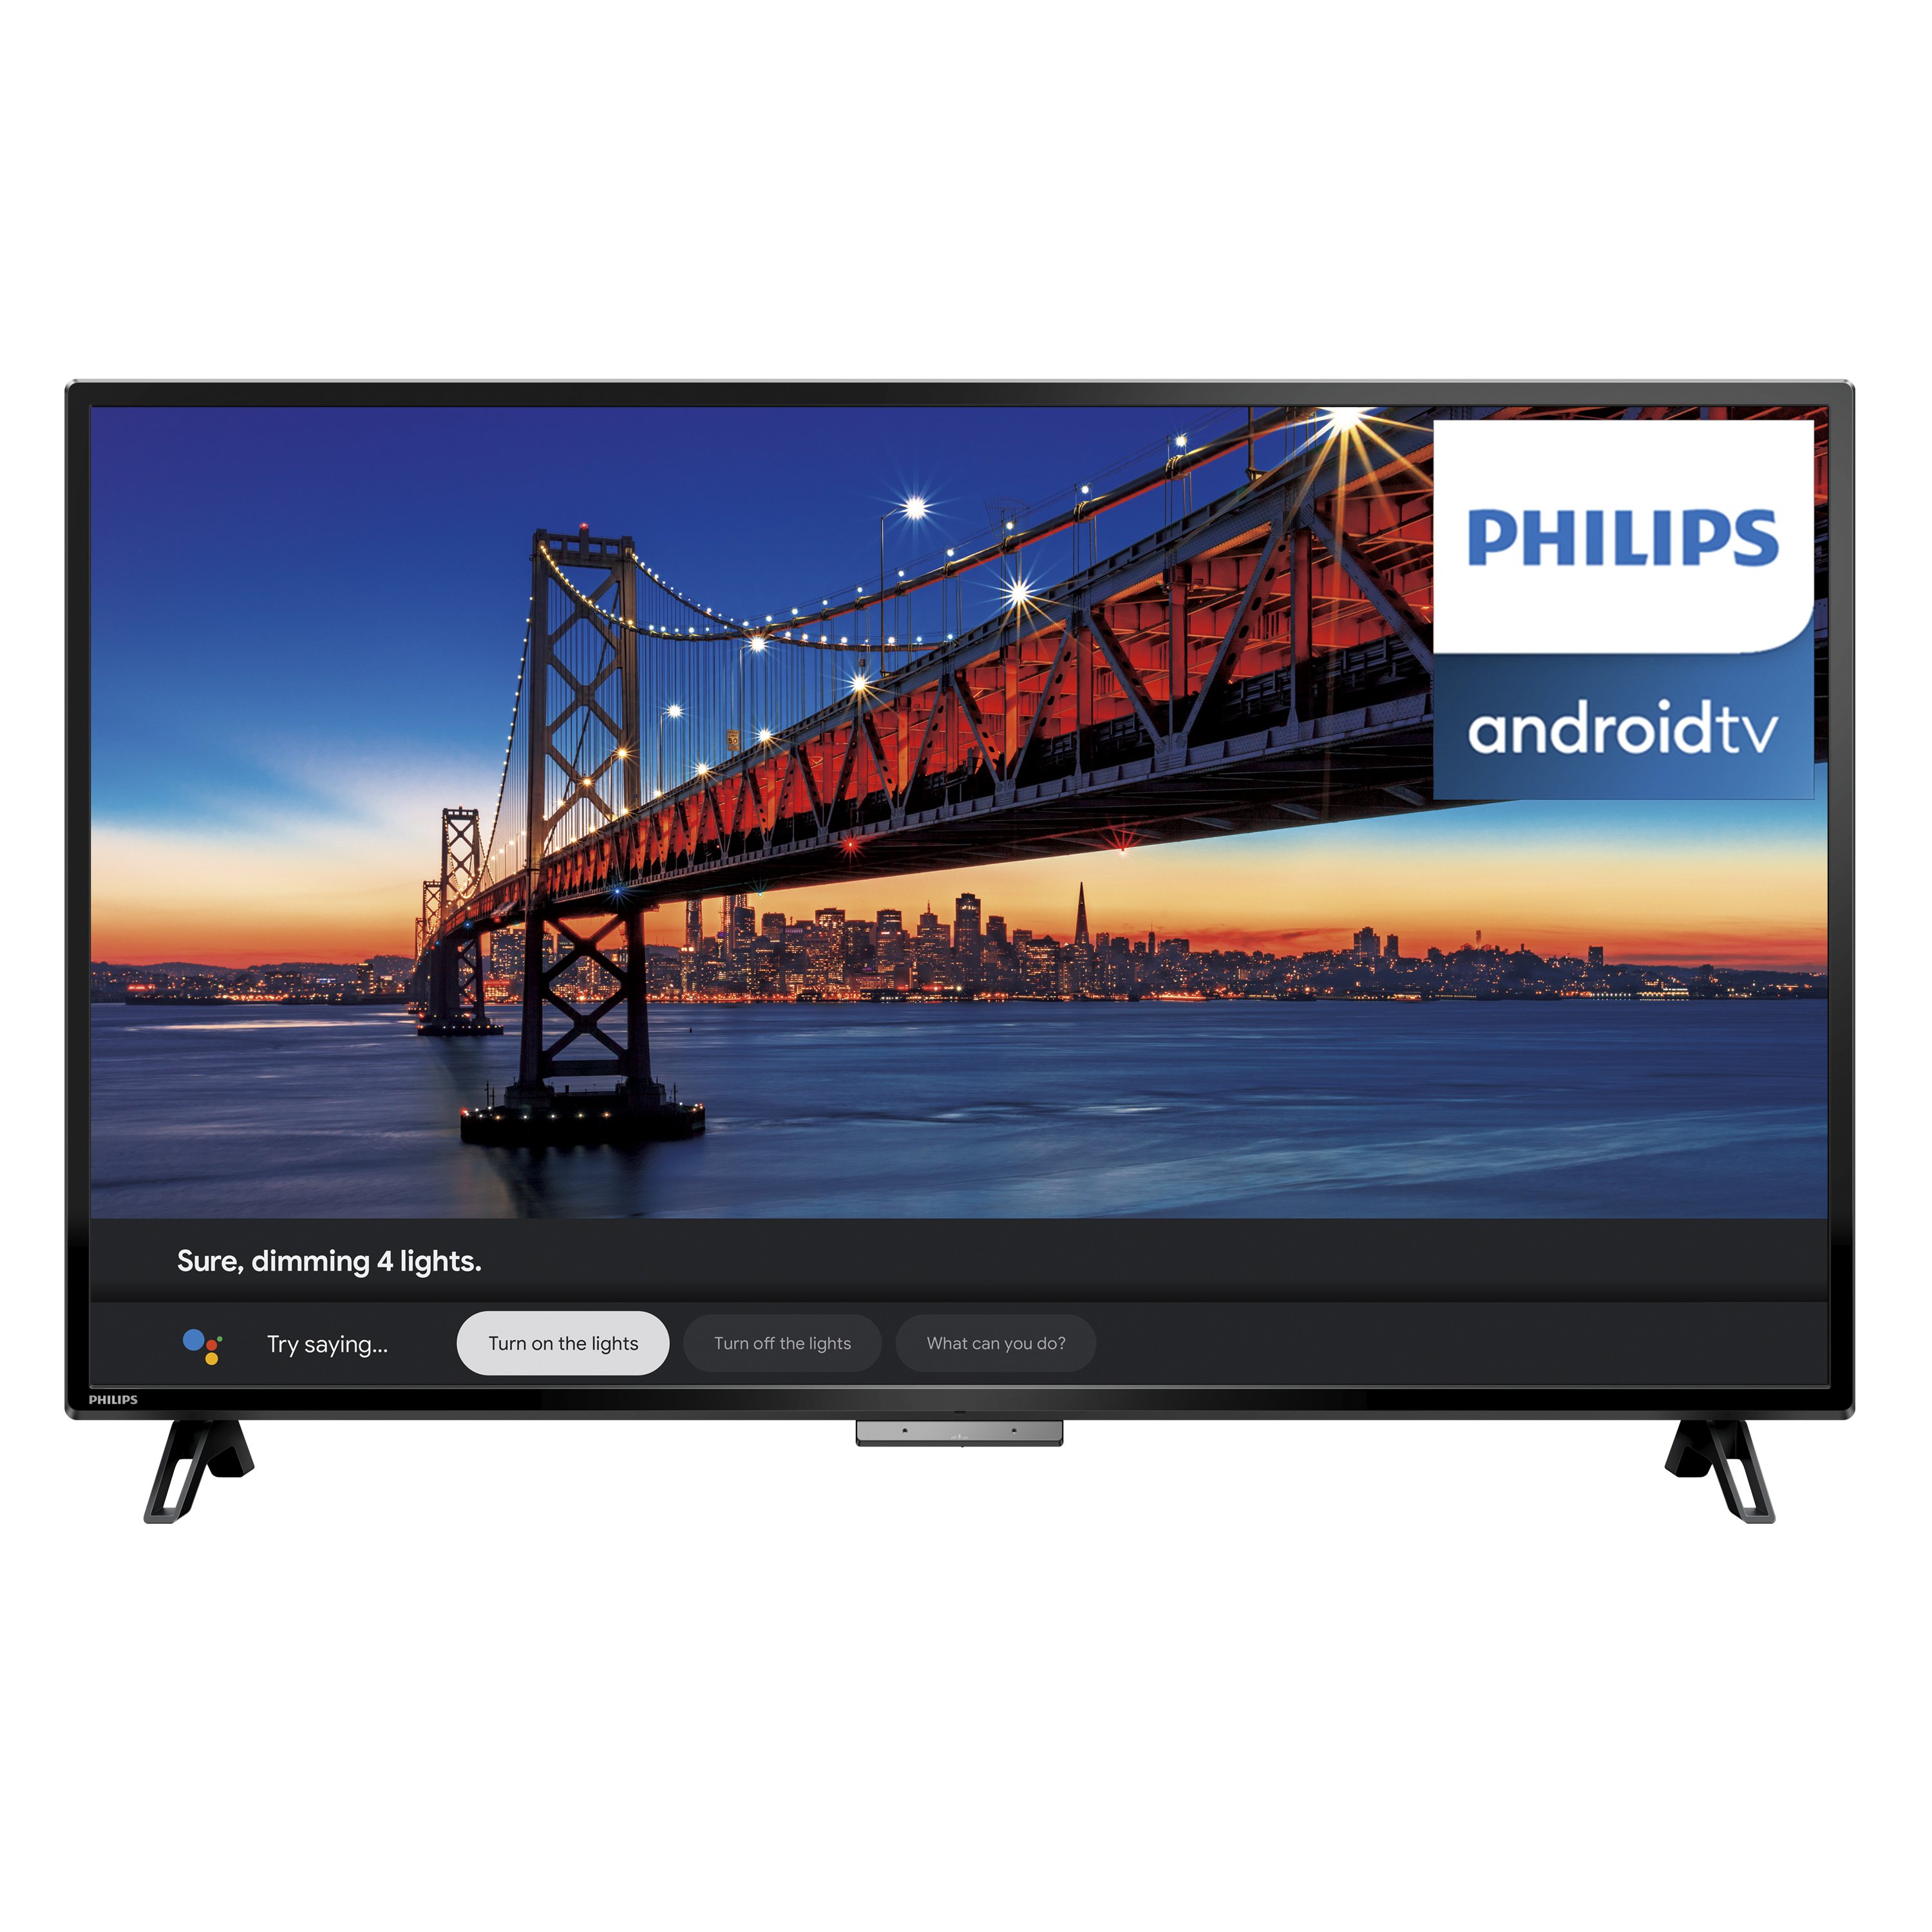 Philips 50" Class 4K Ultra HD (2160p) Android Smart TV with Handsfree Google Built-in (50PFL5806/F7) - image 1 of 19